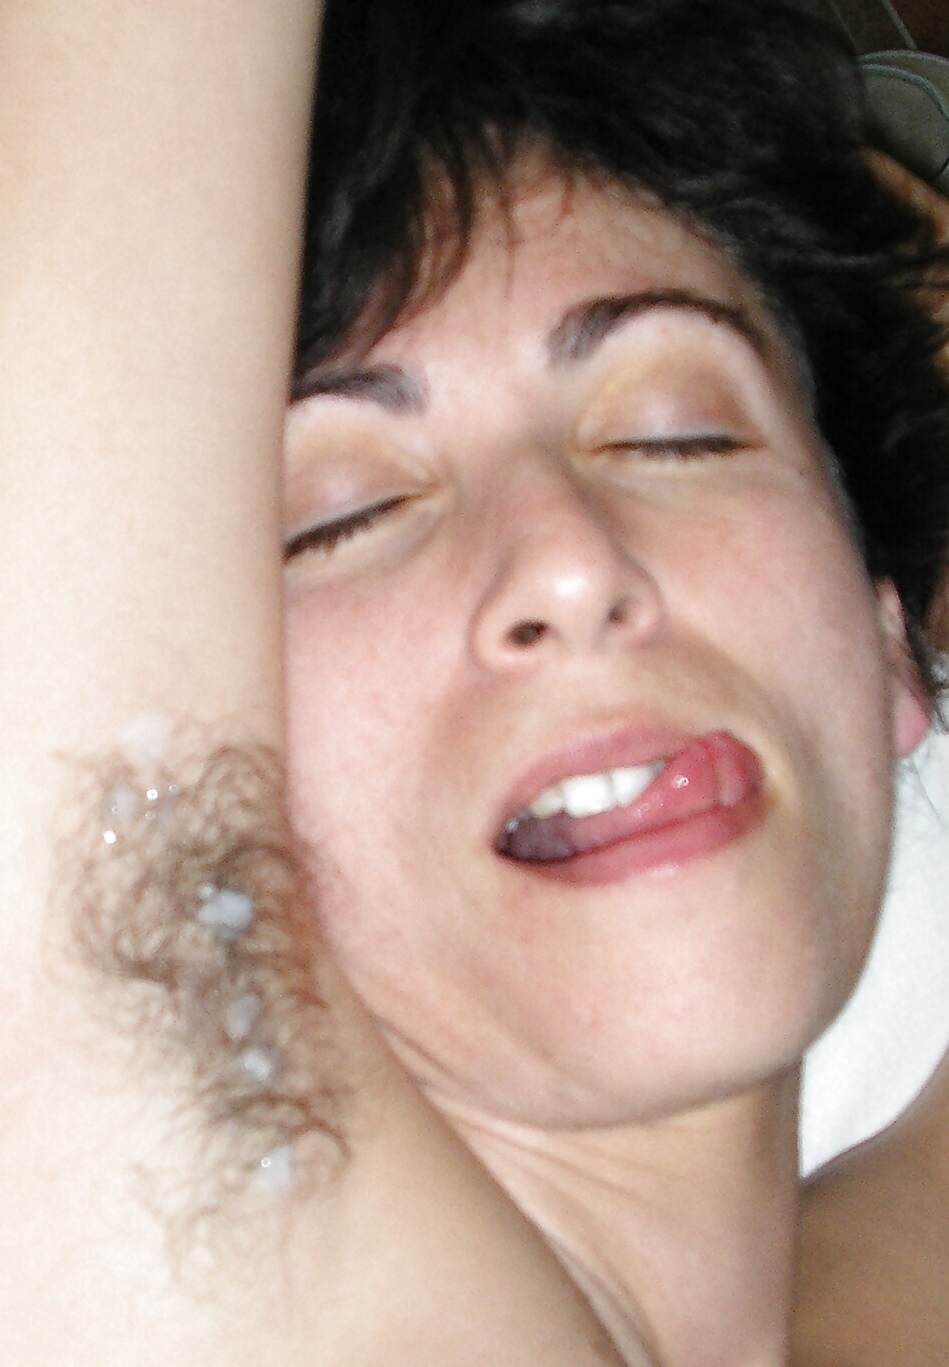 Porn Image Amateur Hairy Armpits Spreading Pits Love Is In The Hair